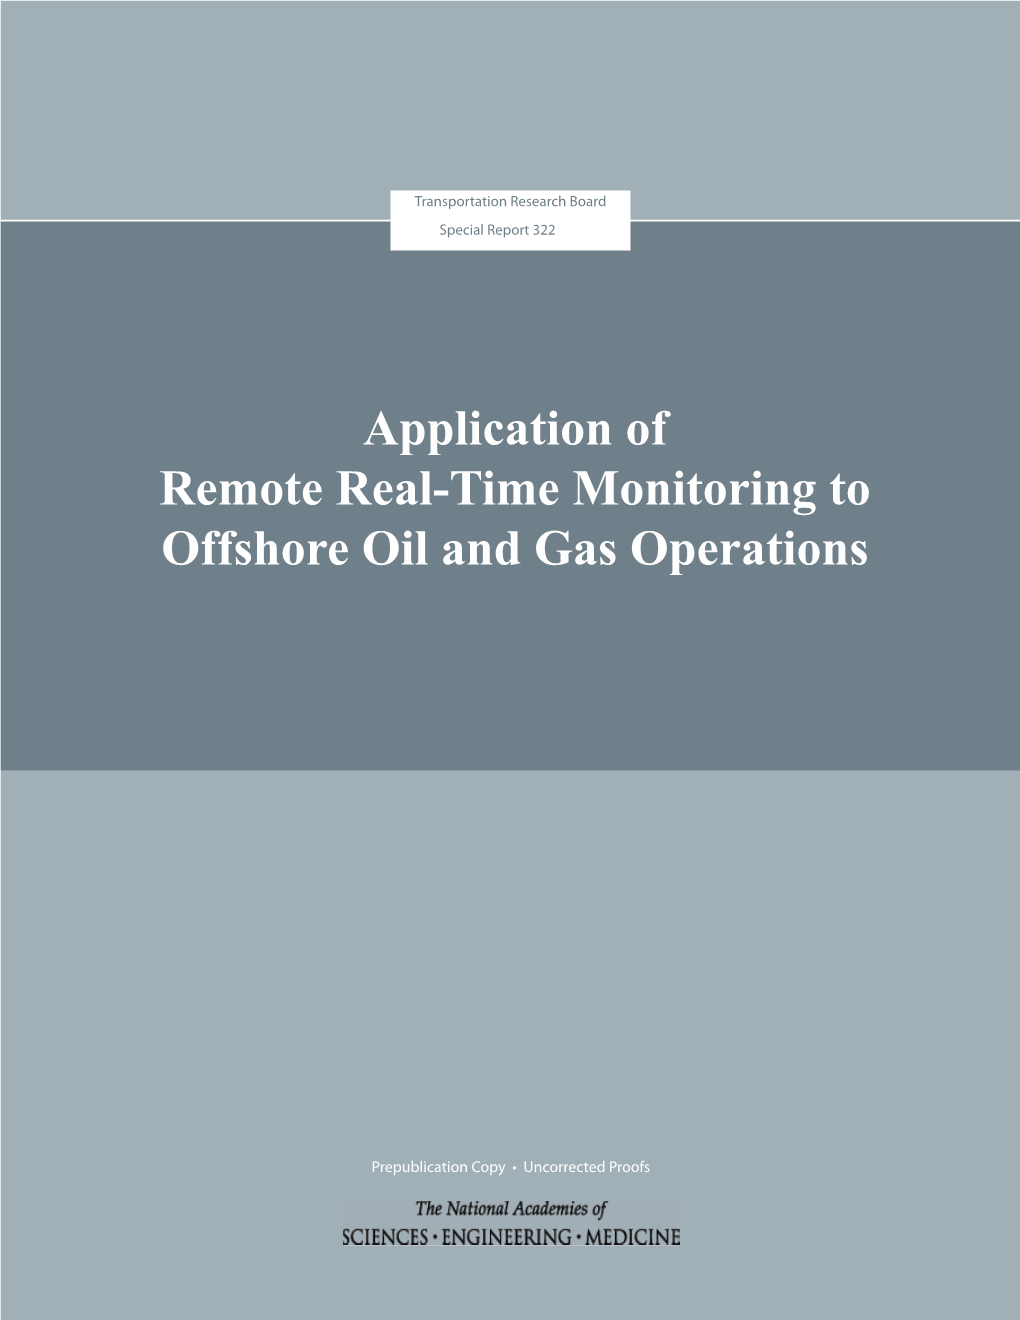 Application of Remote Real-Time Monitoring to Offshore Oil and Gas Operations